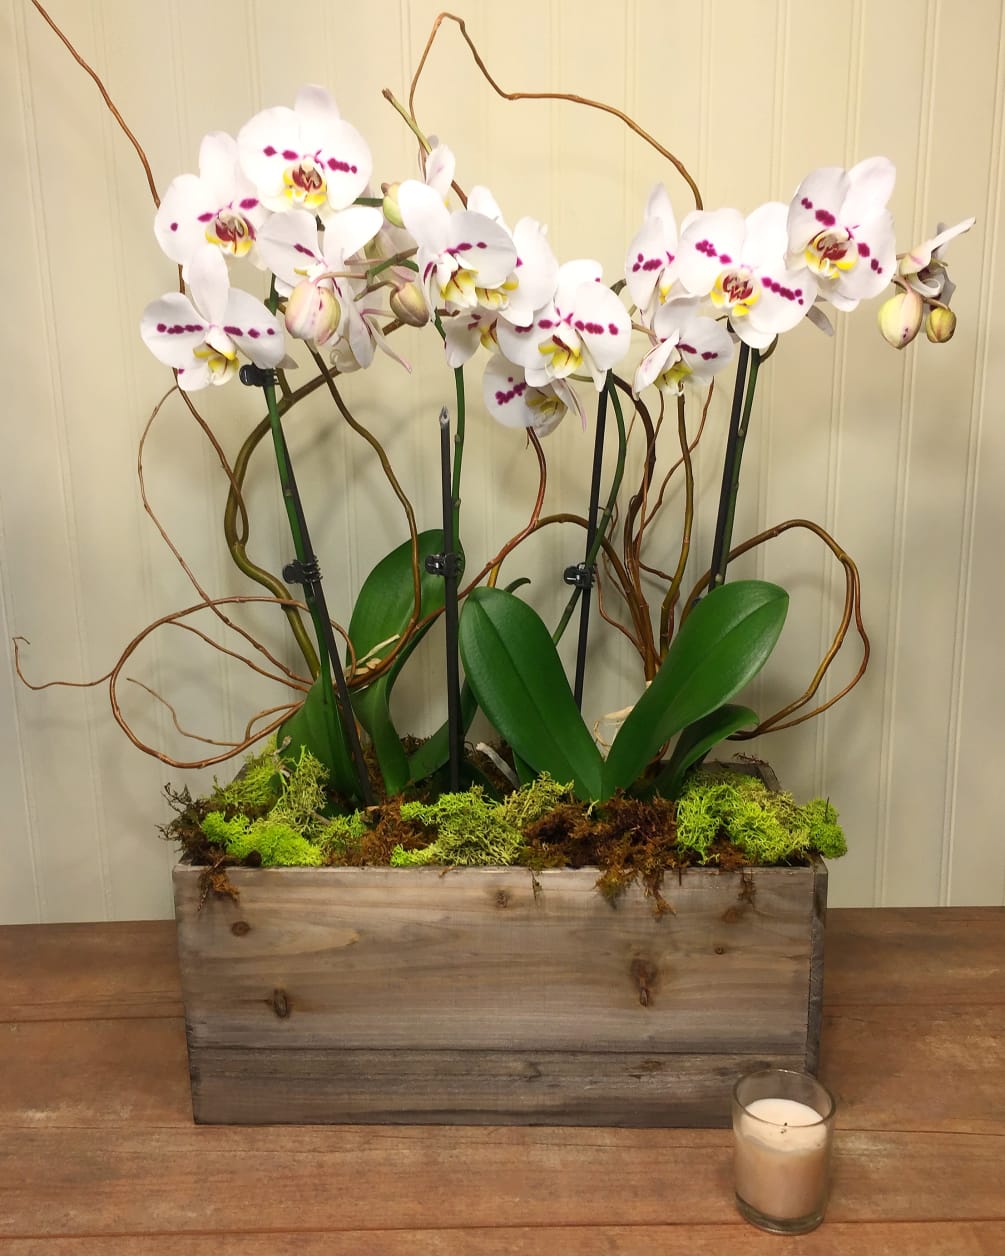 This elegant foursome of sweeping Phalenopsis Orchid plants would be a picturesque